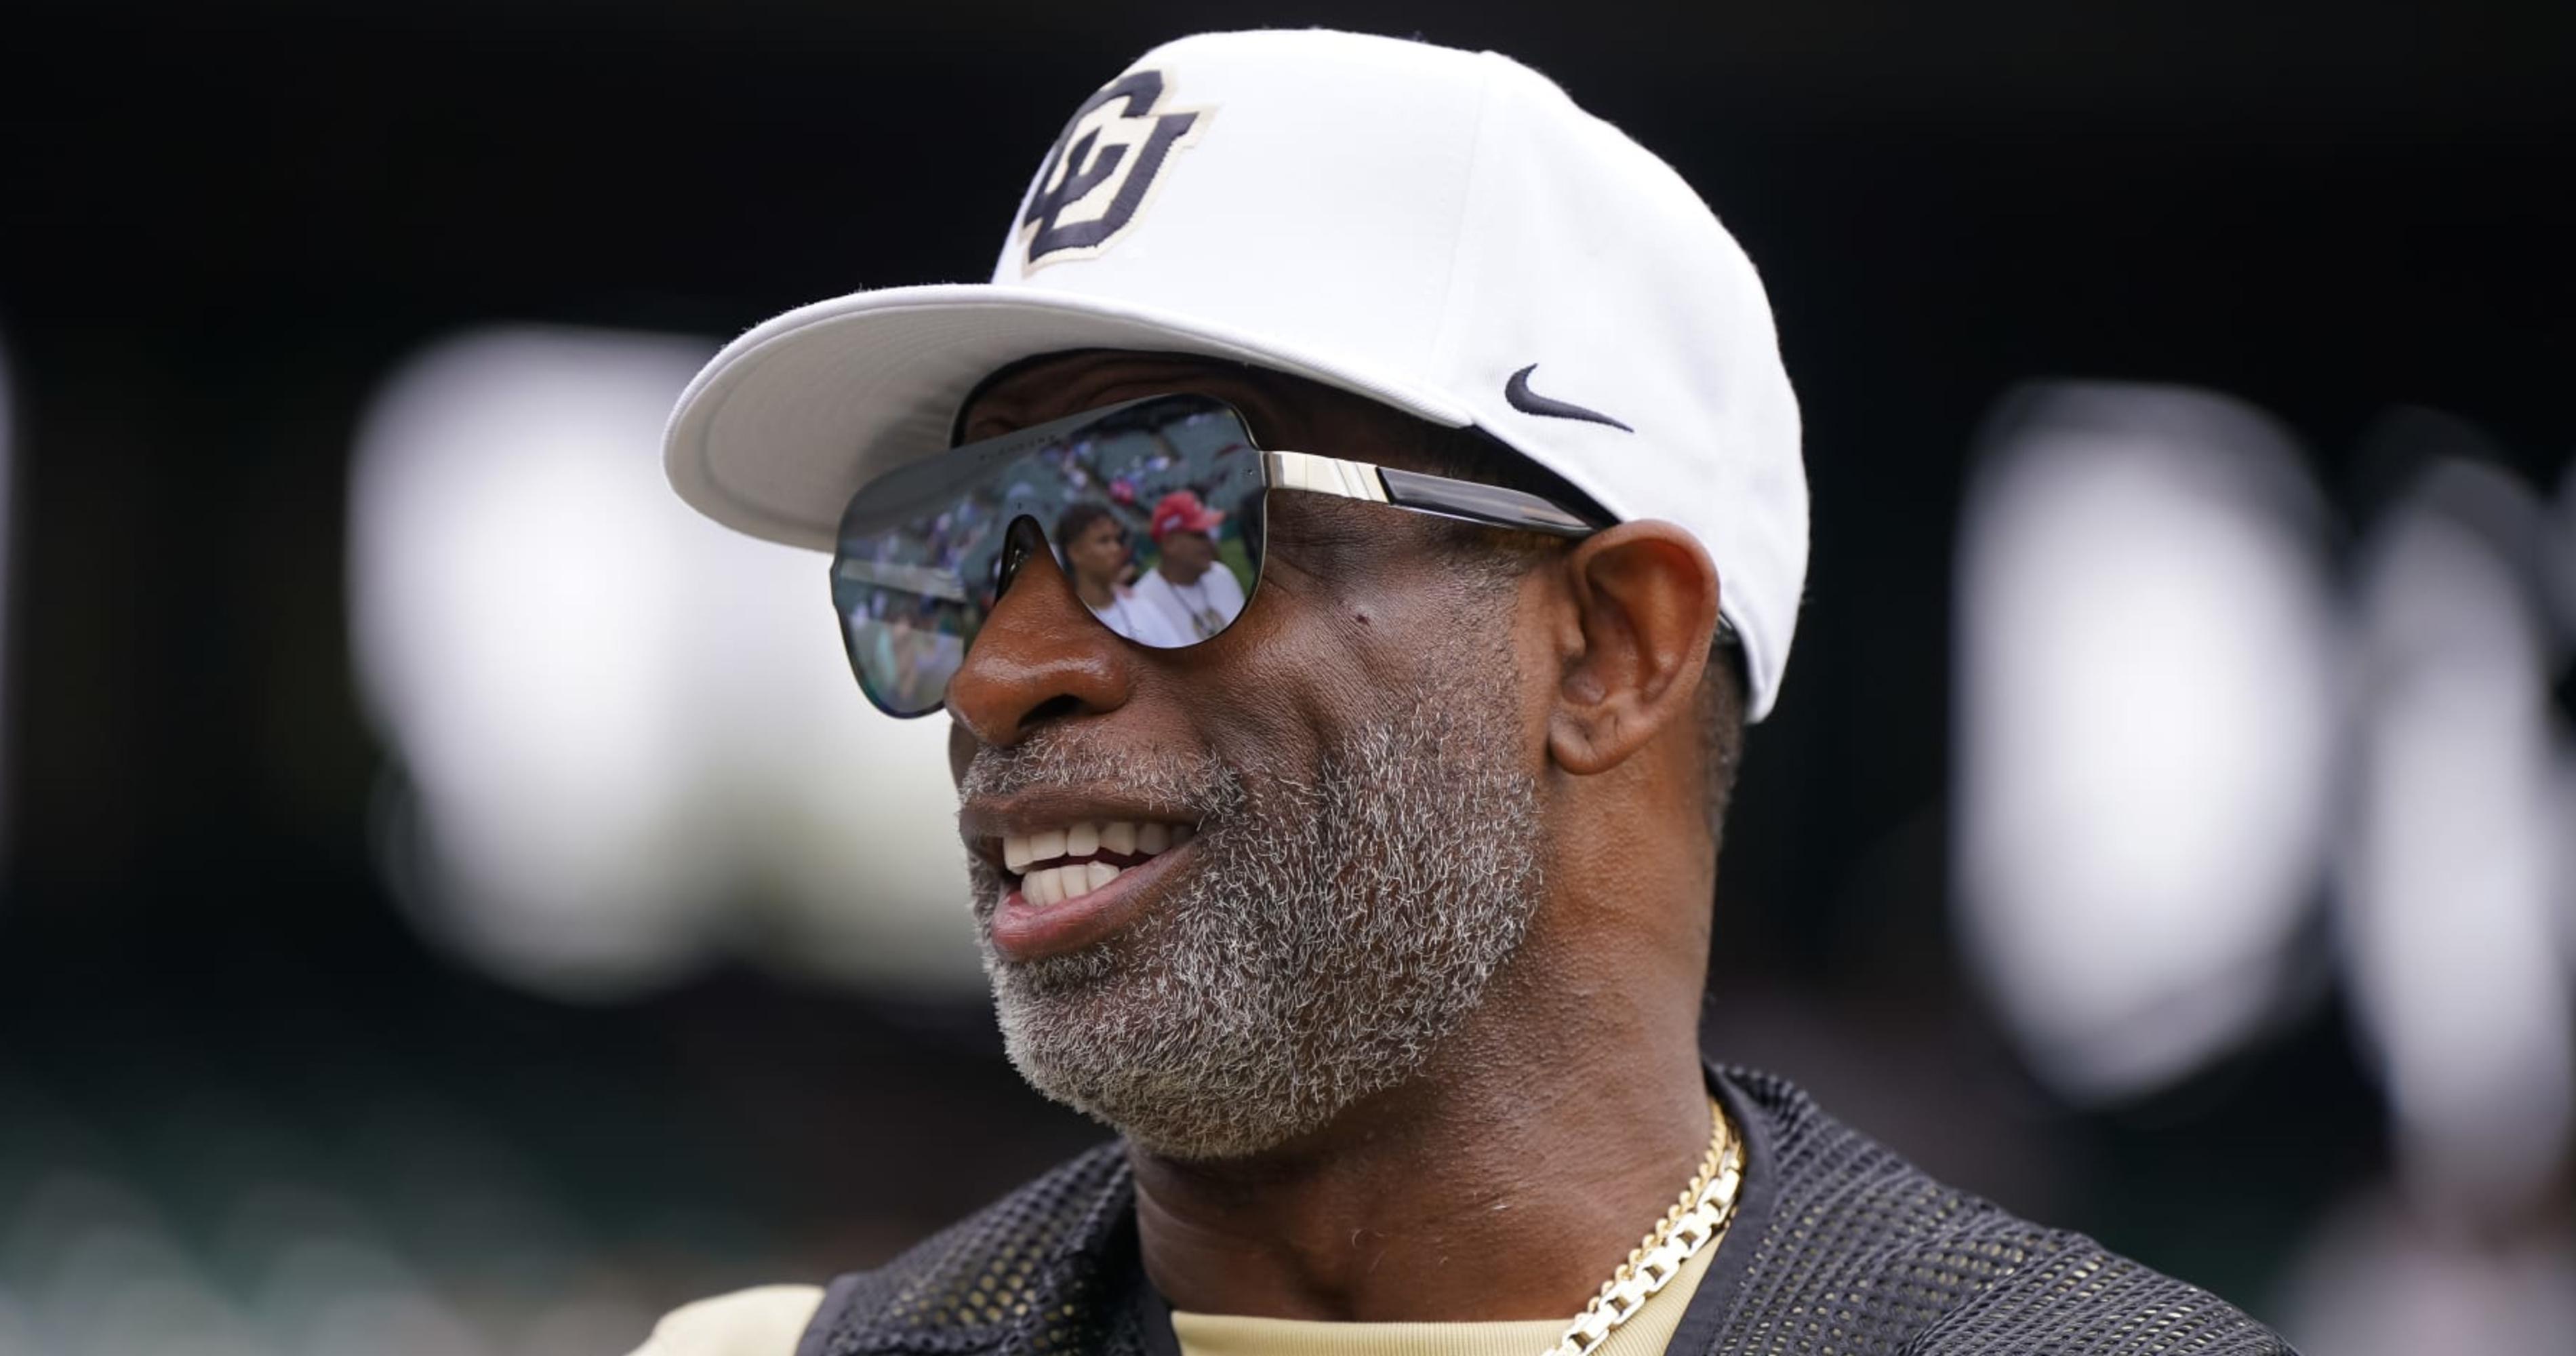 Colorado's Deion Sanders on NIL: I Don't Want Players to Put the Bag Before the Game